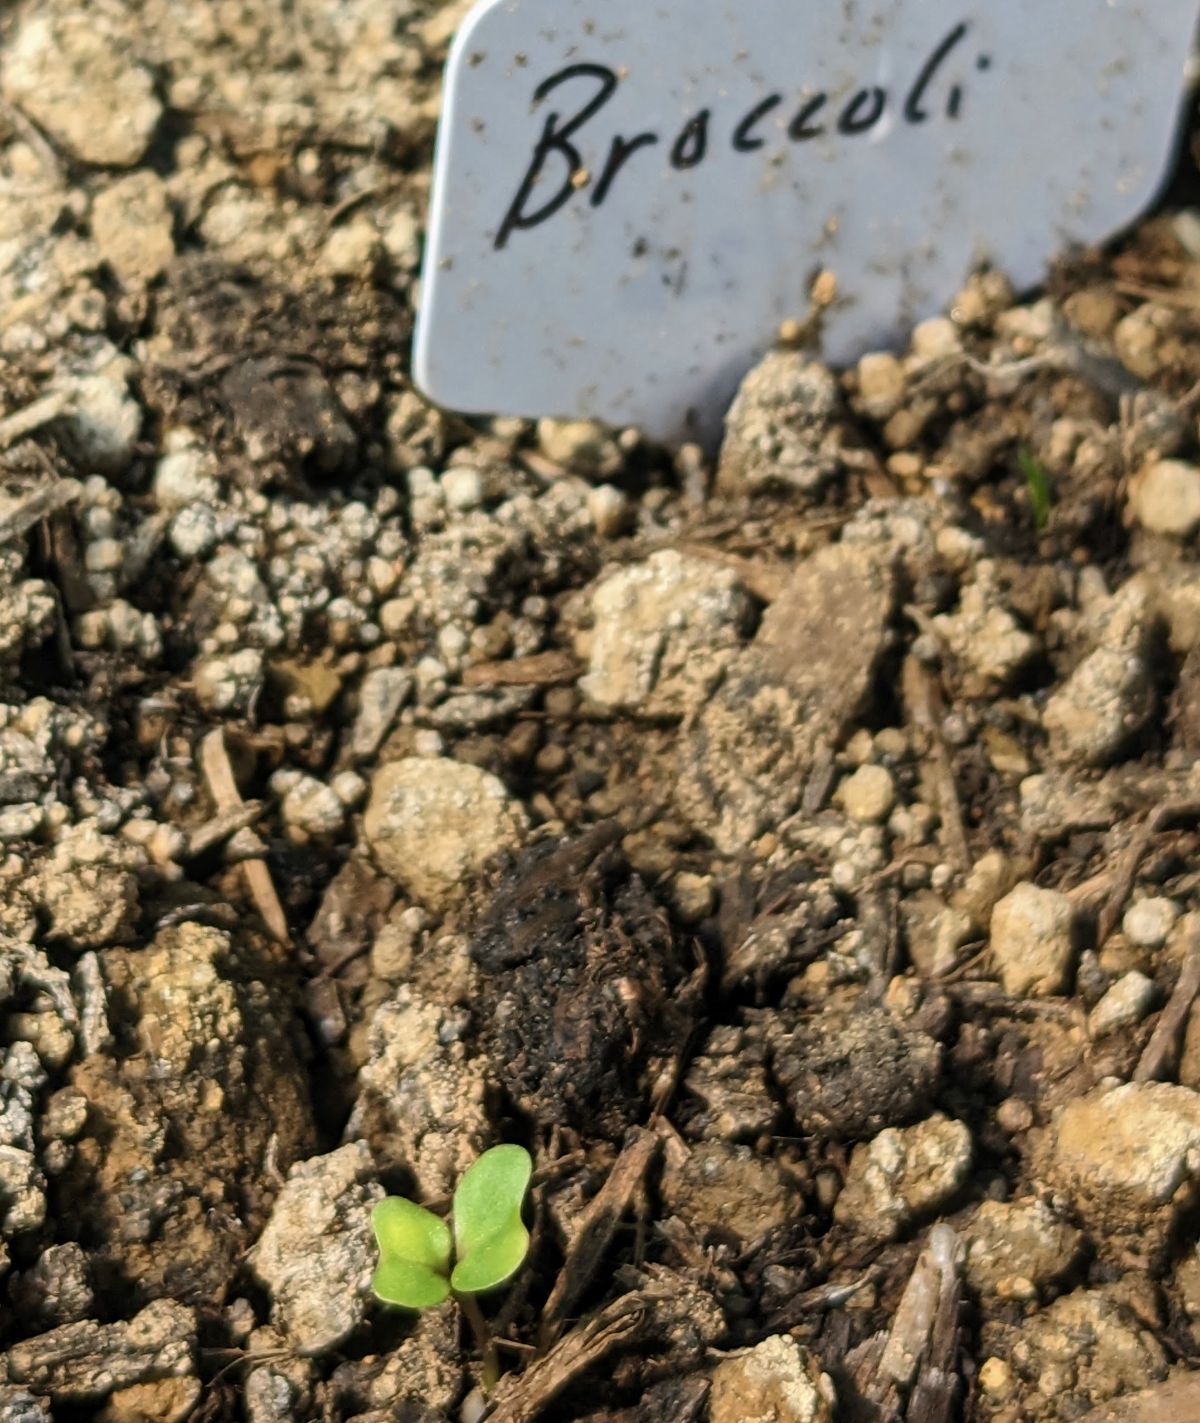 Tiny broccoli seedling in soil next to a Broccoli plant tag